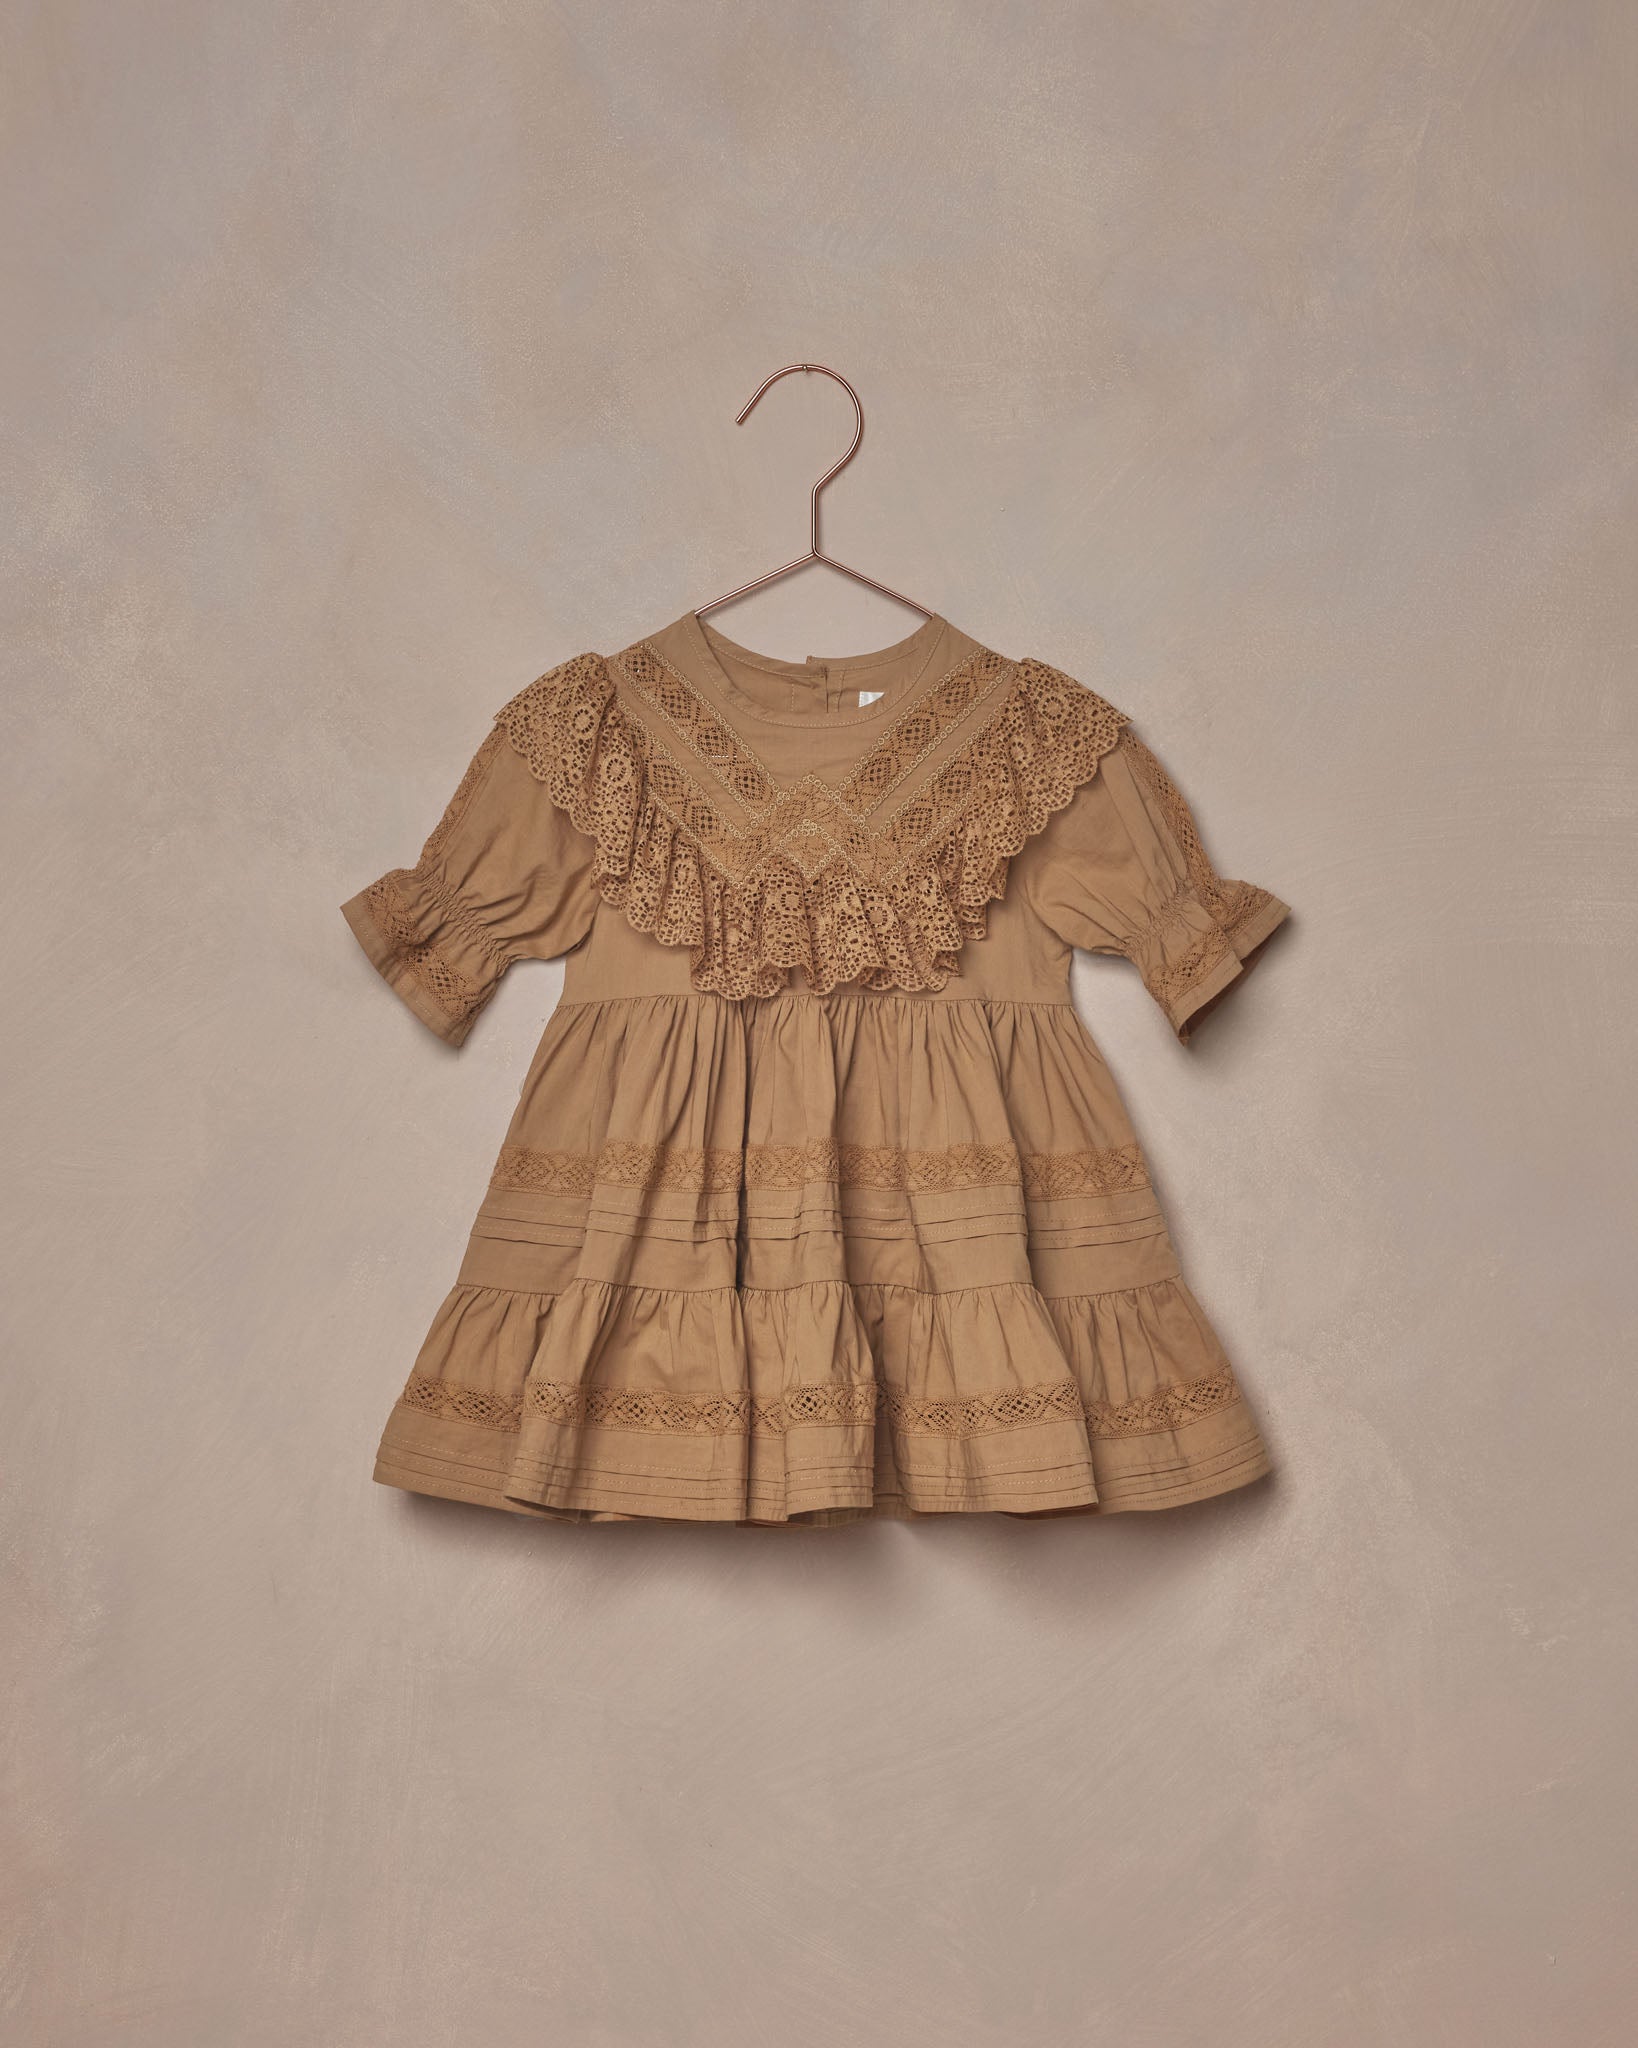 Genevieve Dress || Golden - Rylee + Cru | Kids Clothes | Trendy Baby Clothes | Modern Infant Outfits |